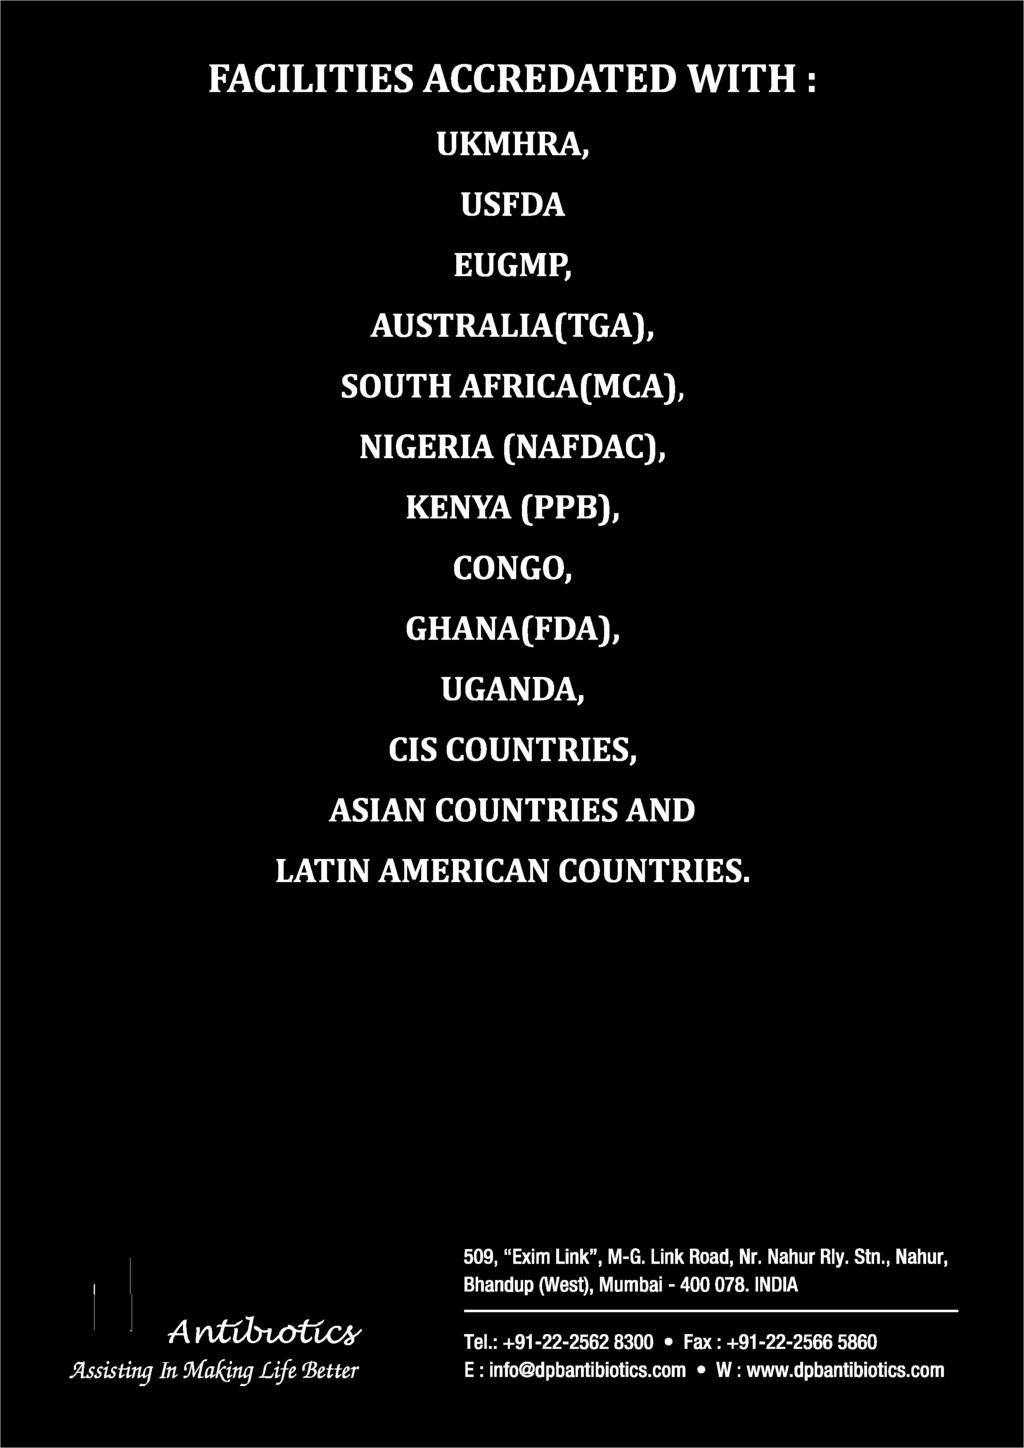 COUNTRIES, ASIAN COUNTRIES AND LATIN